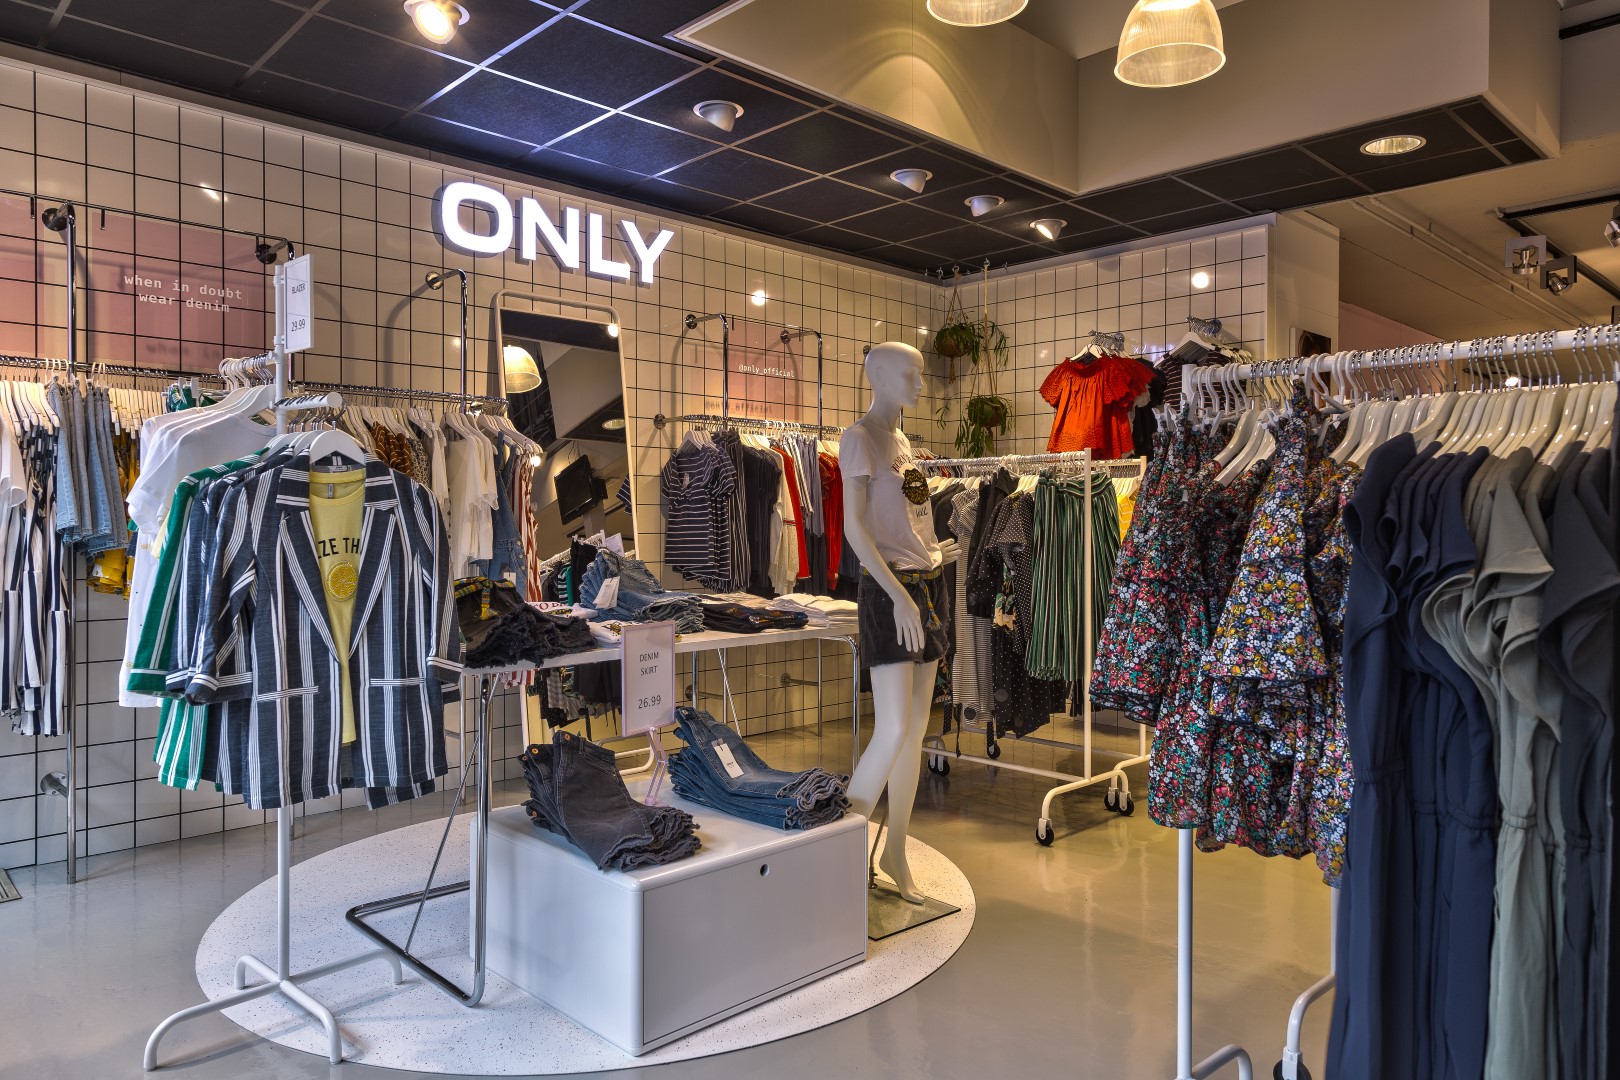 decoration of fashion store with clothing racks and lighting